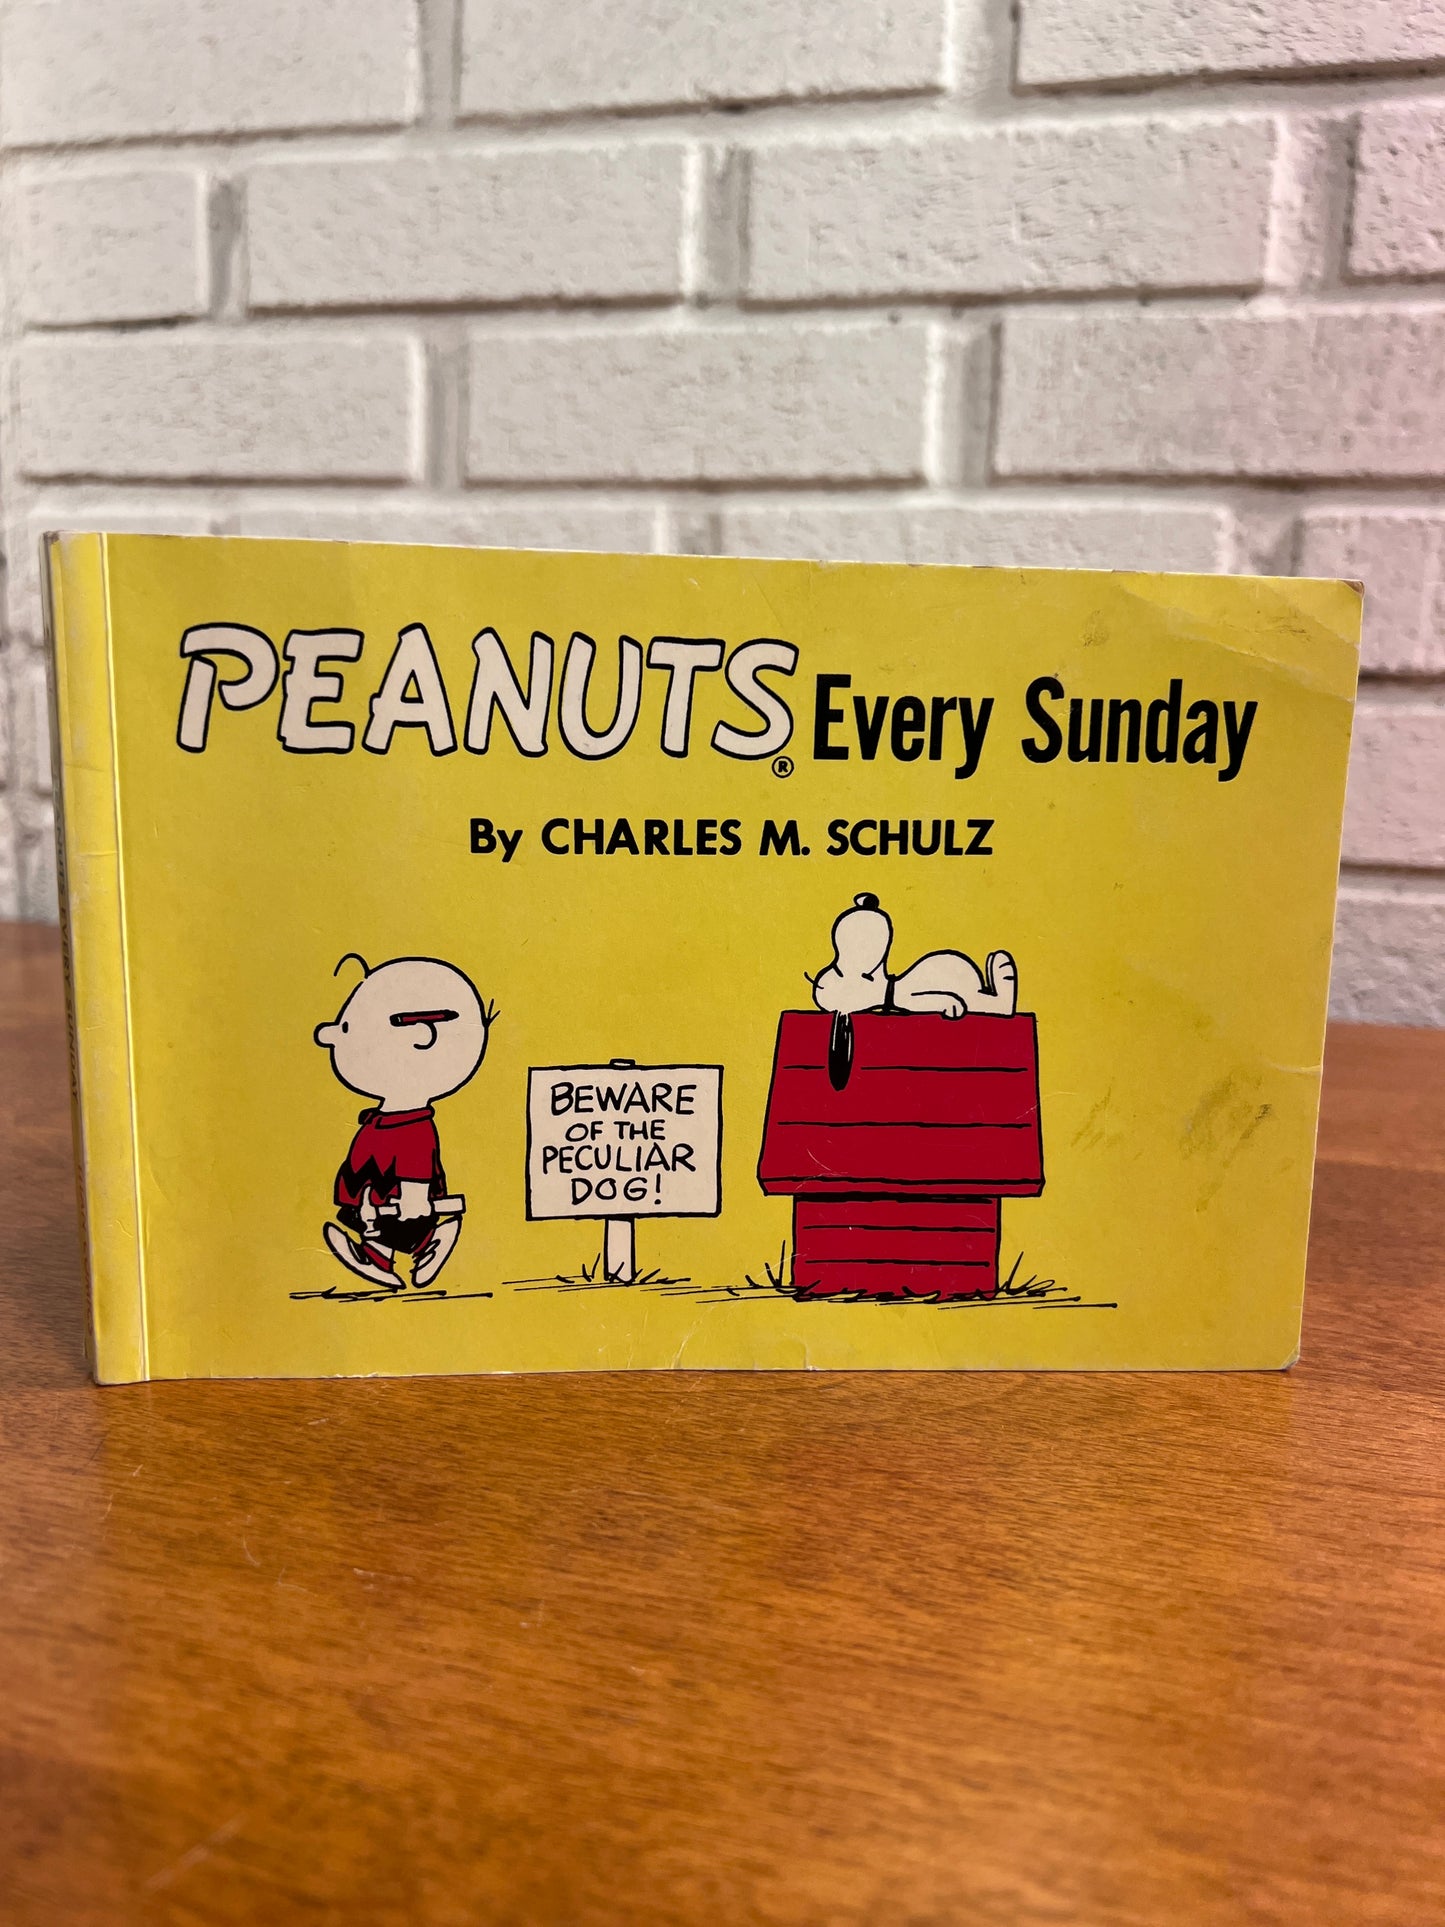 Peanuts Every Sunday by Charles M. Schultz [2015, 1st Print]